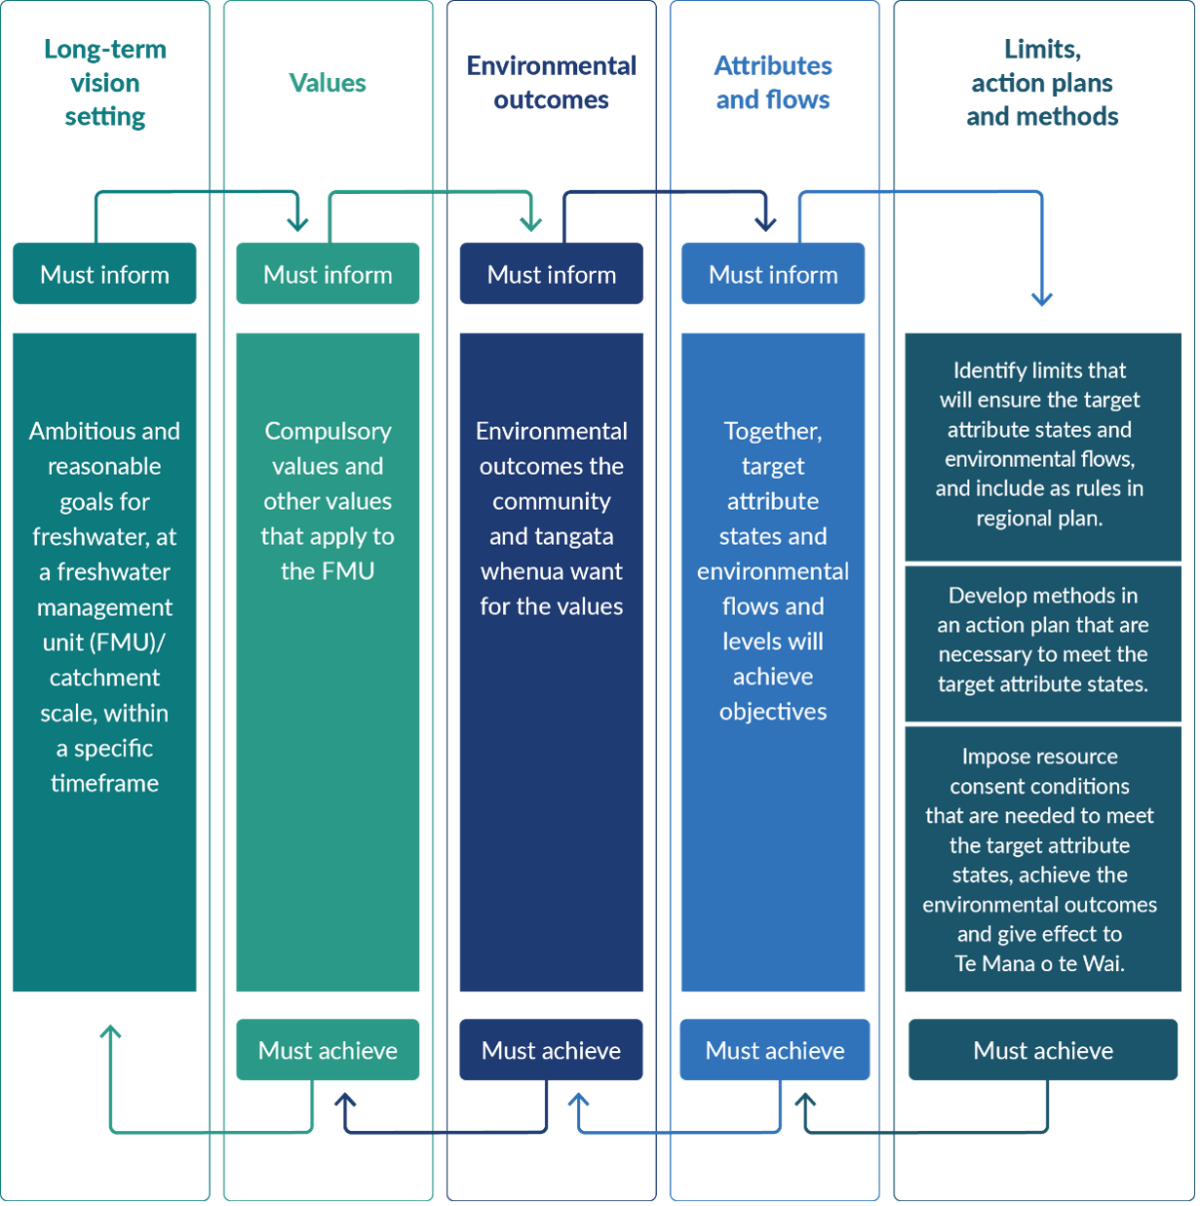 Infographic on the NPS-FM framework showing the connections between vision setting, values, environmental outcomes, attributes and flows, and limits, action plans and methods. 